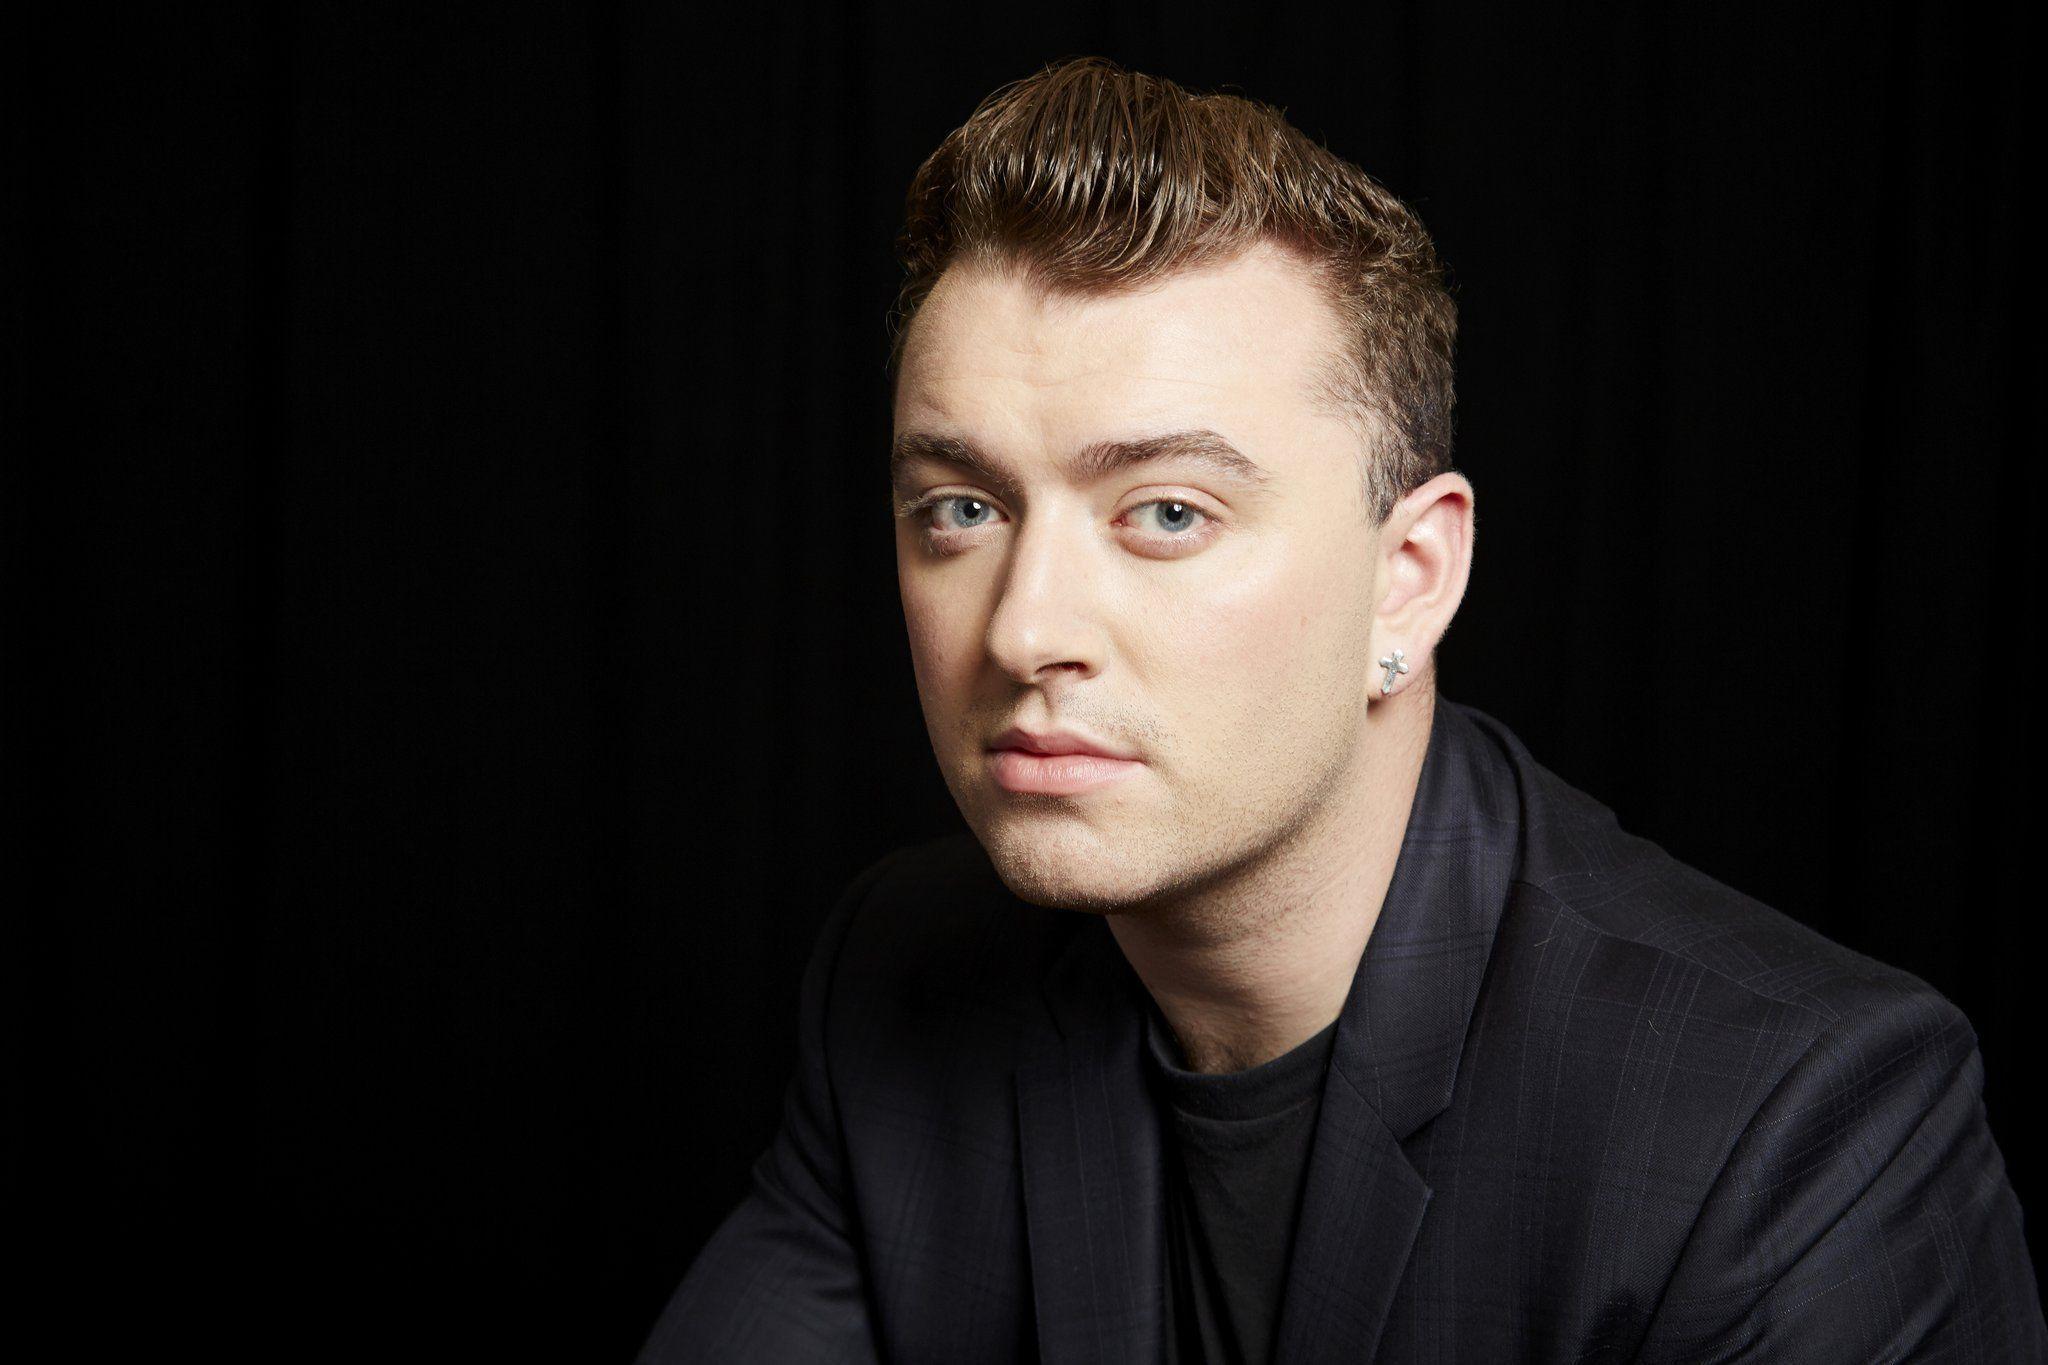 Sam Smith Wallpaper Image Photo Picture Background